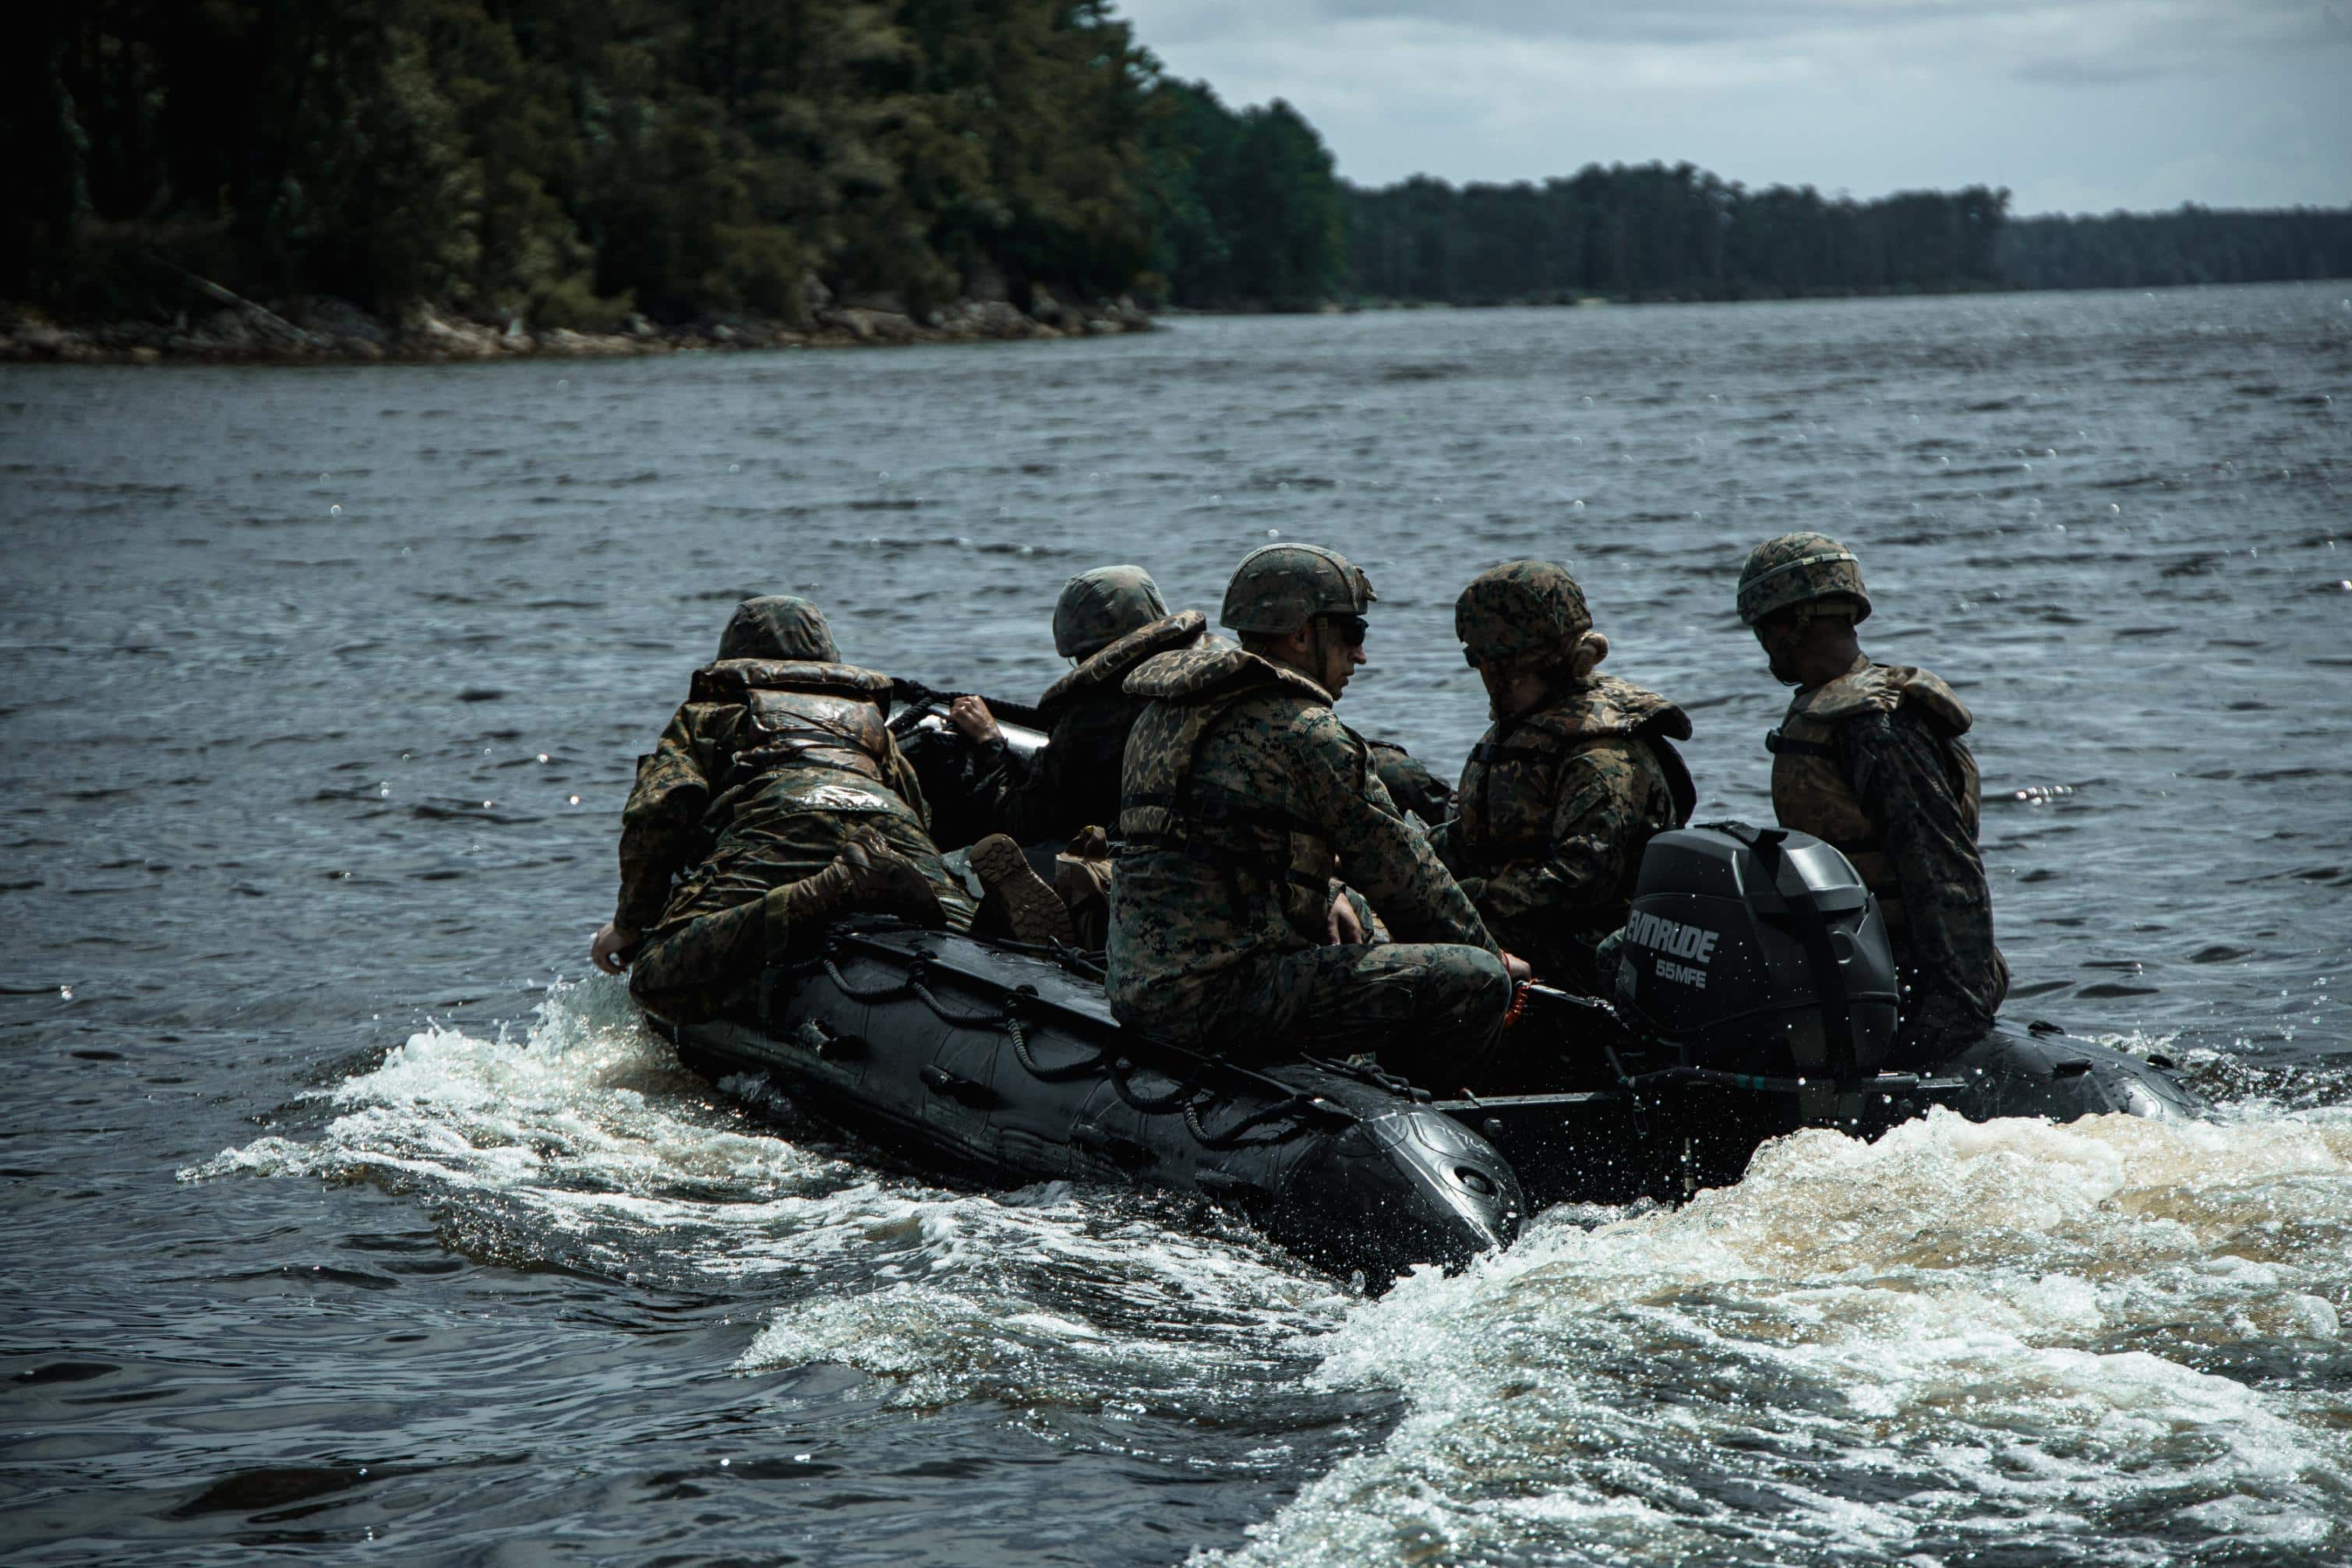 U.S. Marines with Headquarters and Service Company, 8th Engineer Support Battalion, Combat Logistics Regiment 27, depart towards a splash point on a combat rubber reconnaissance craft during Summer Pioneer 2022 at Camp Lejeune, North Carolina, July 15, 2022. Summer Pioneer 2022 is a naval engineering exercise demonstrating integrated U.S. Marine Corps and U.S. Navy formations to establish and sustain Expeditionary Advanced Bases (EAB) and Maritime Domain Awareness. (U.S. Marine Corps photo by Lance Cpl. Meshaq Hylton)